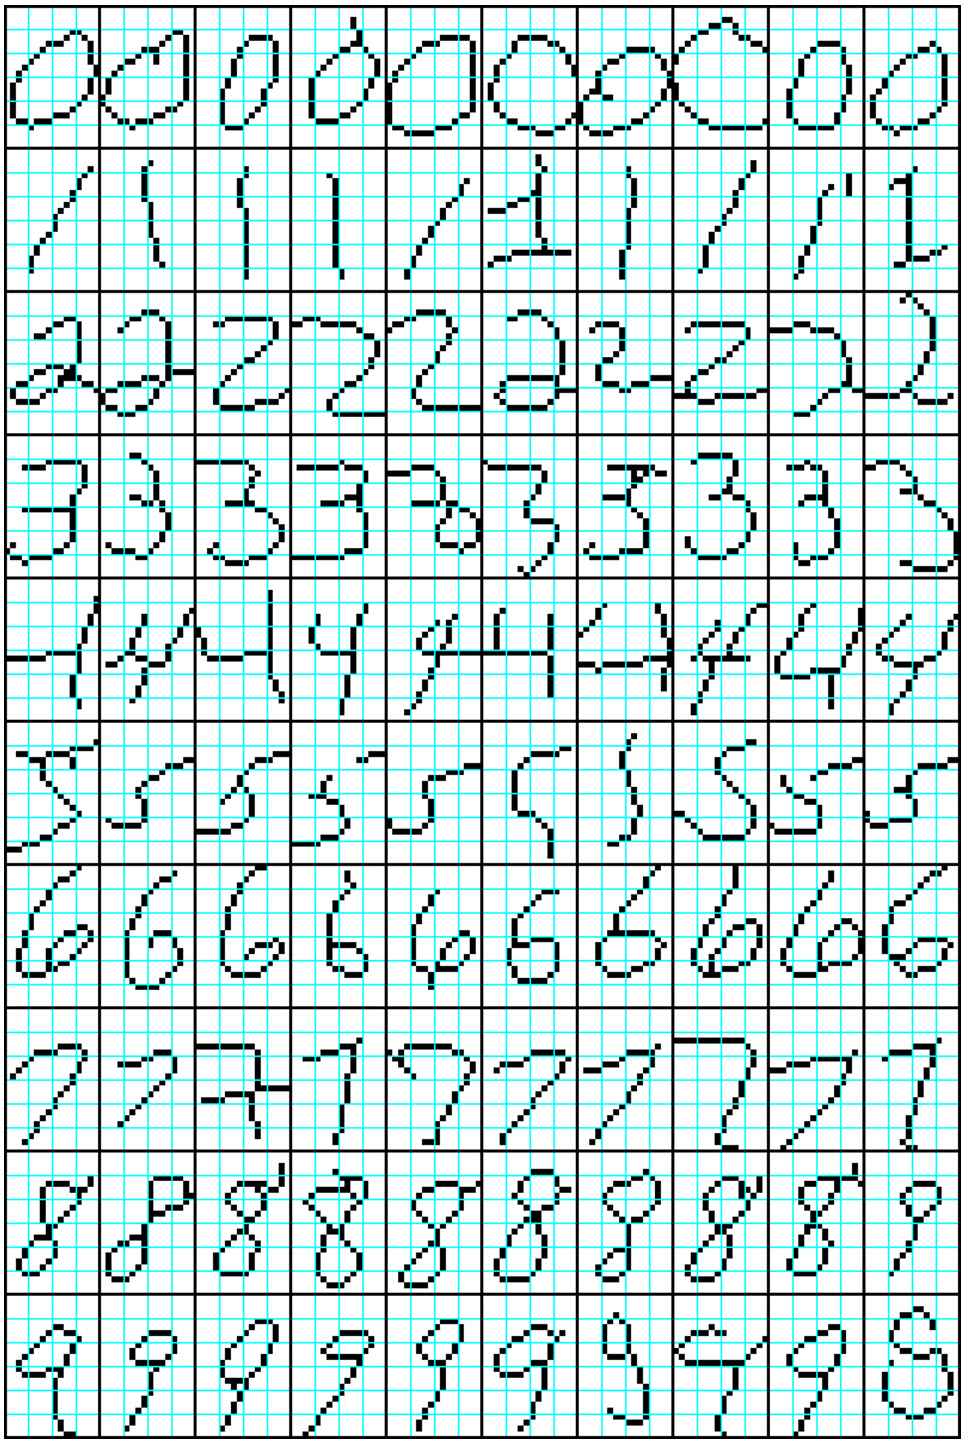 MNIST preprocessed examples